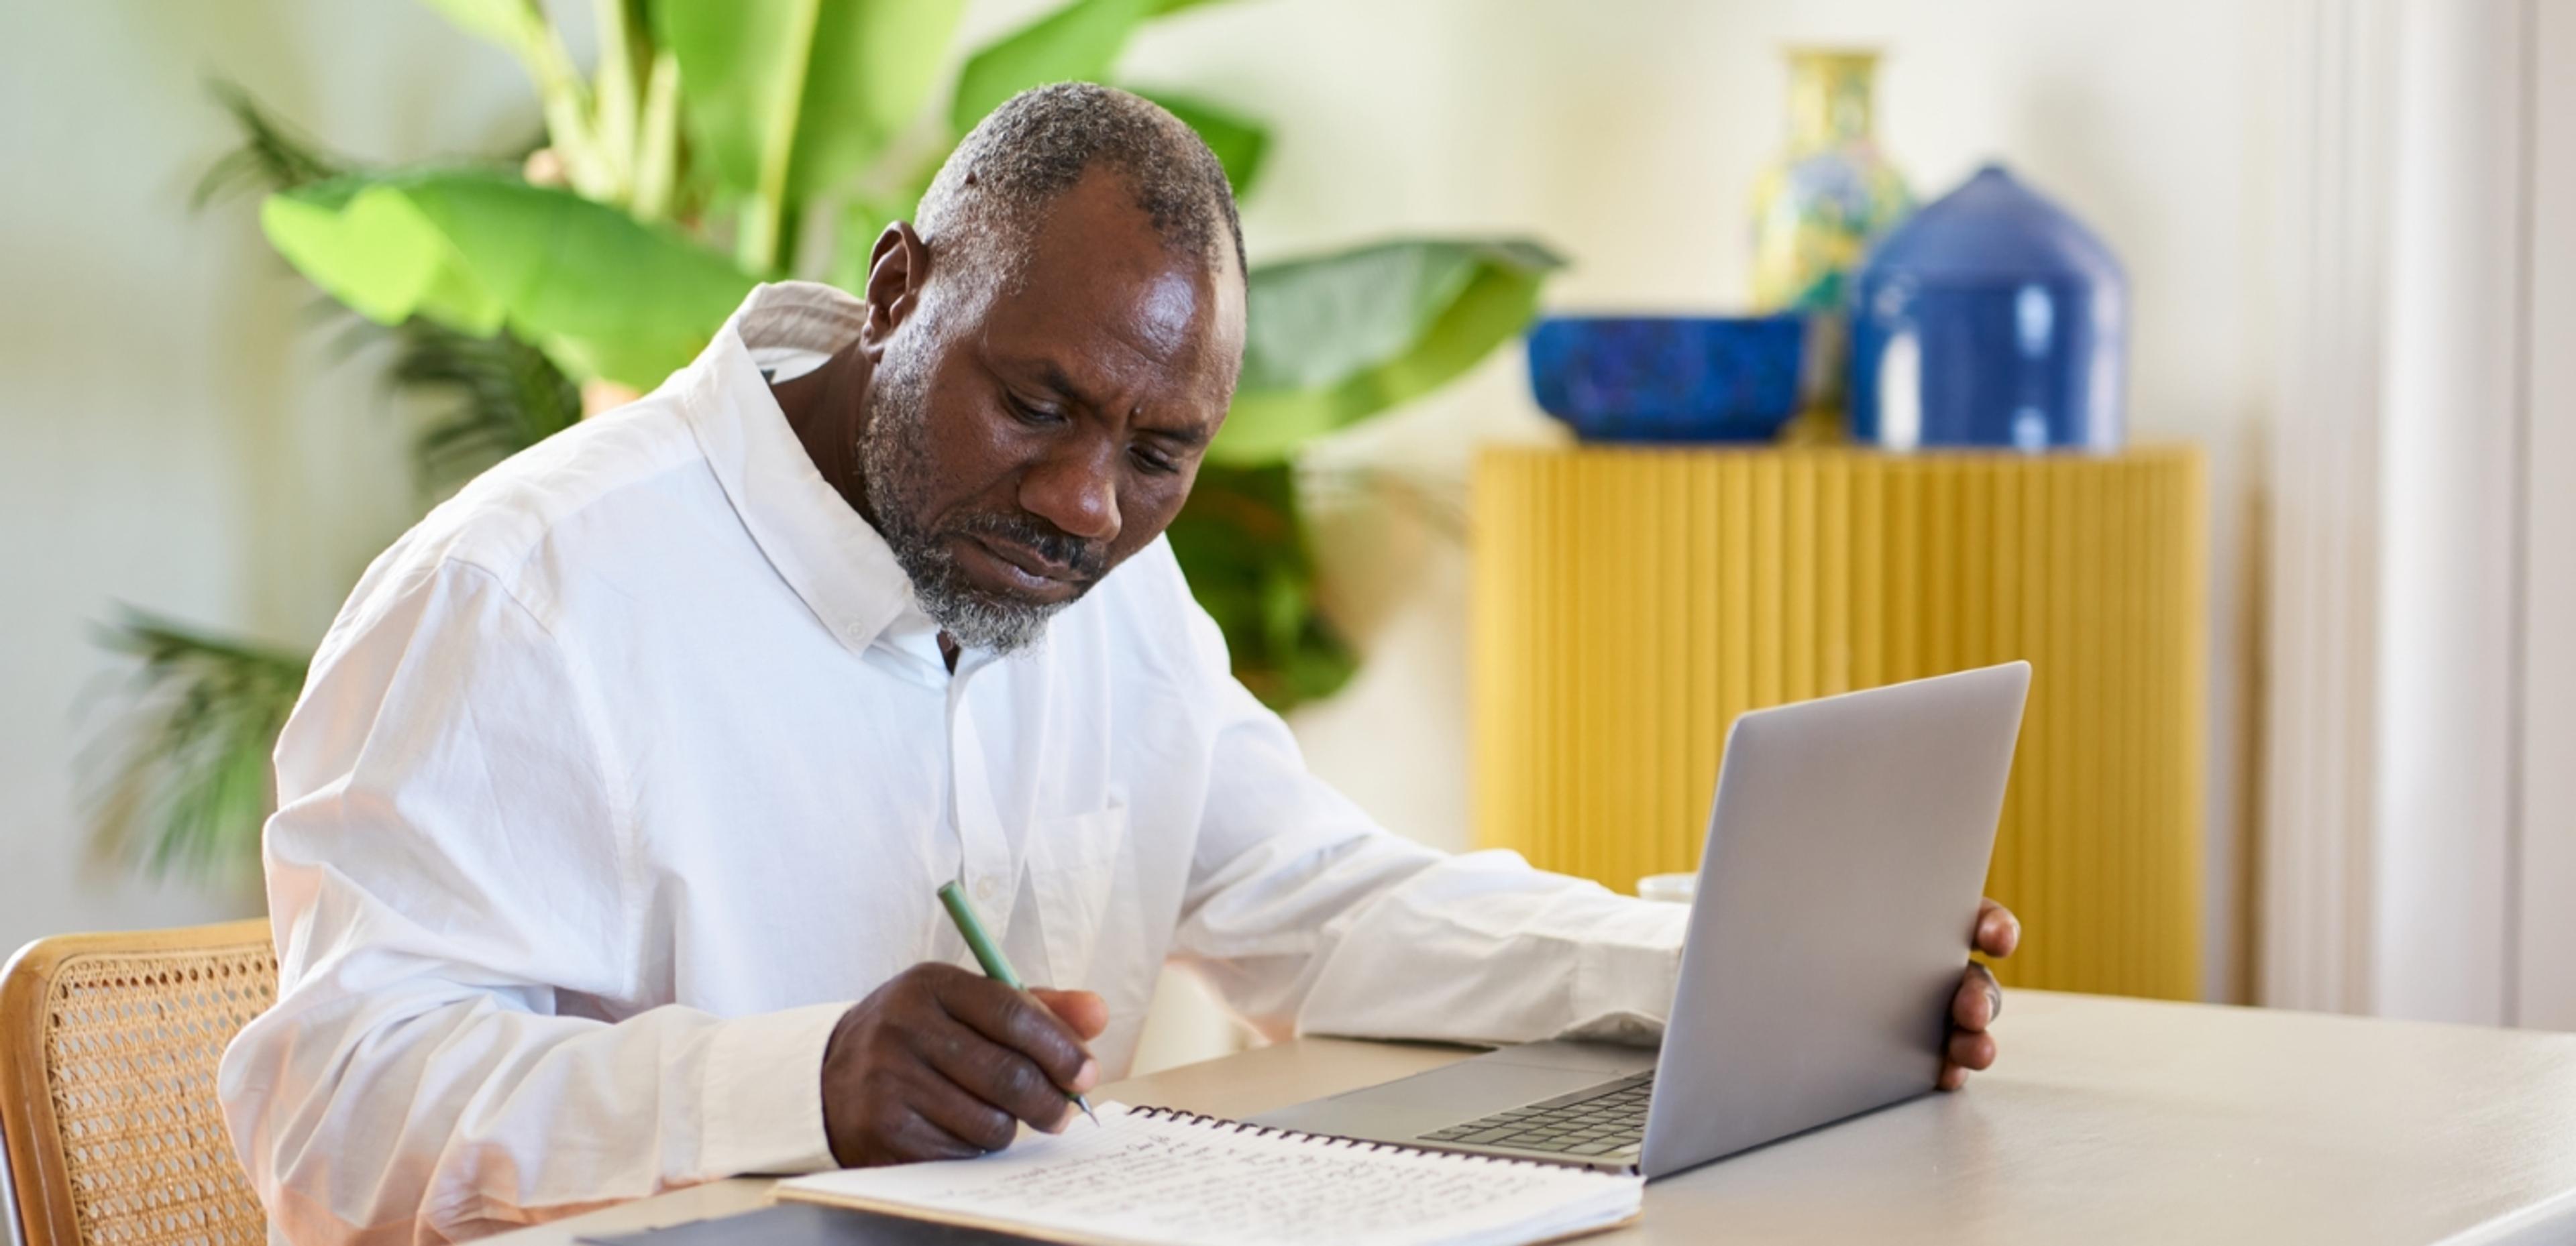 An older Black man in a white shirt is focused on writing in a notebook while sitting at a white table with a laptop open in front of him. The room is bright with natural light, and the decor includes a potted plant and a blue vase on a yellow cabinet, suggesting a comfortable home environment.